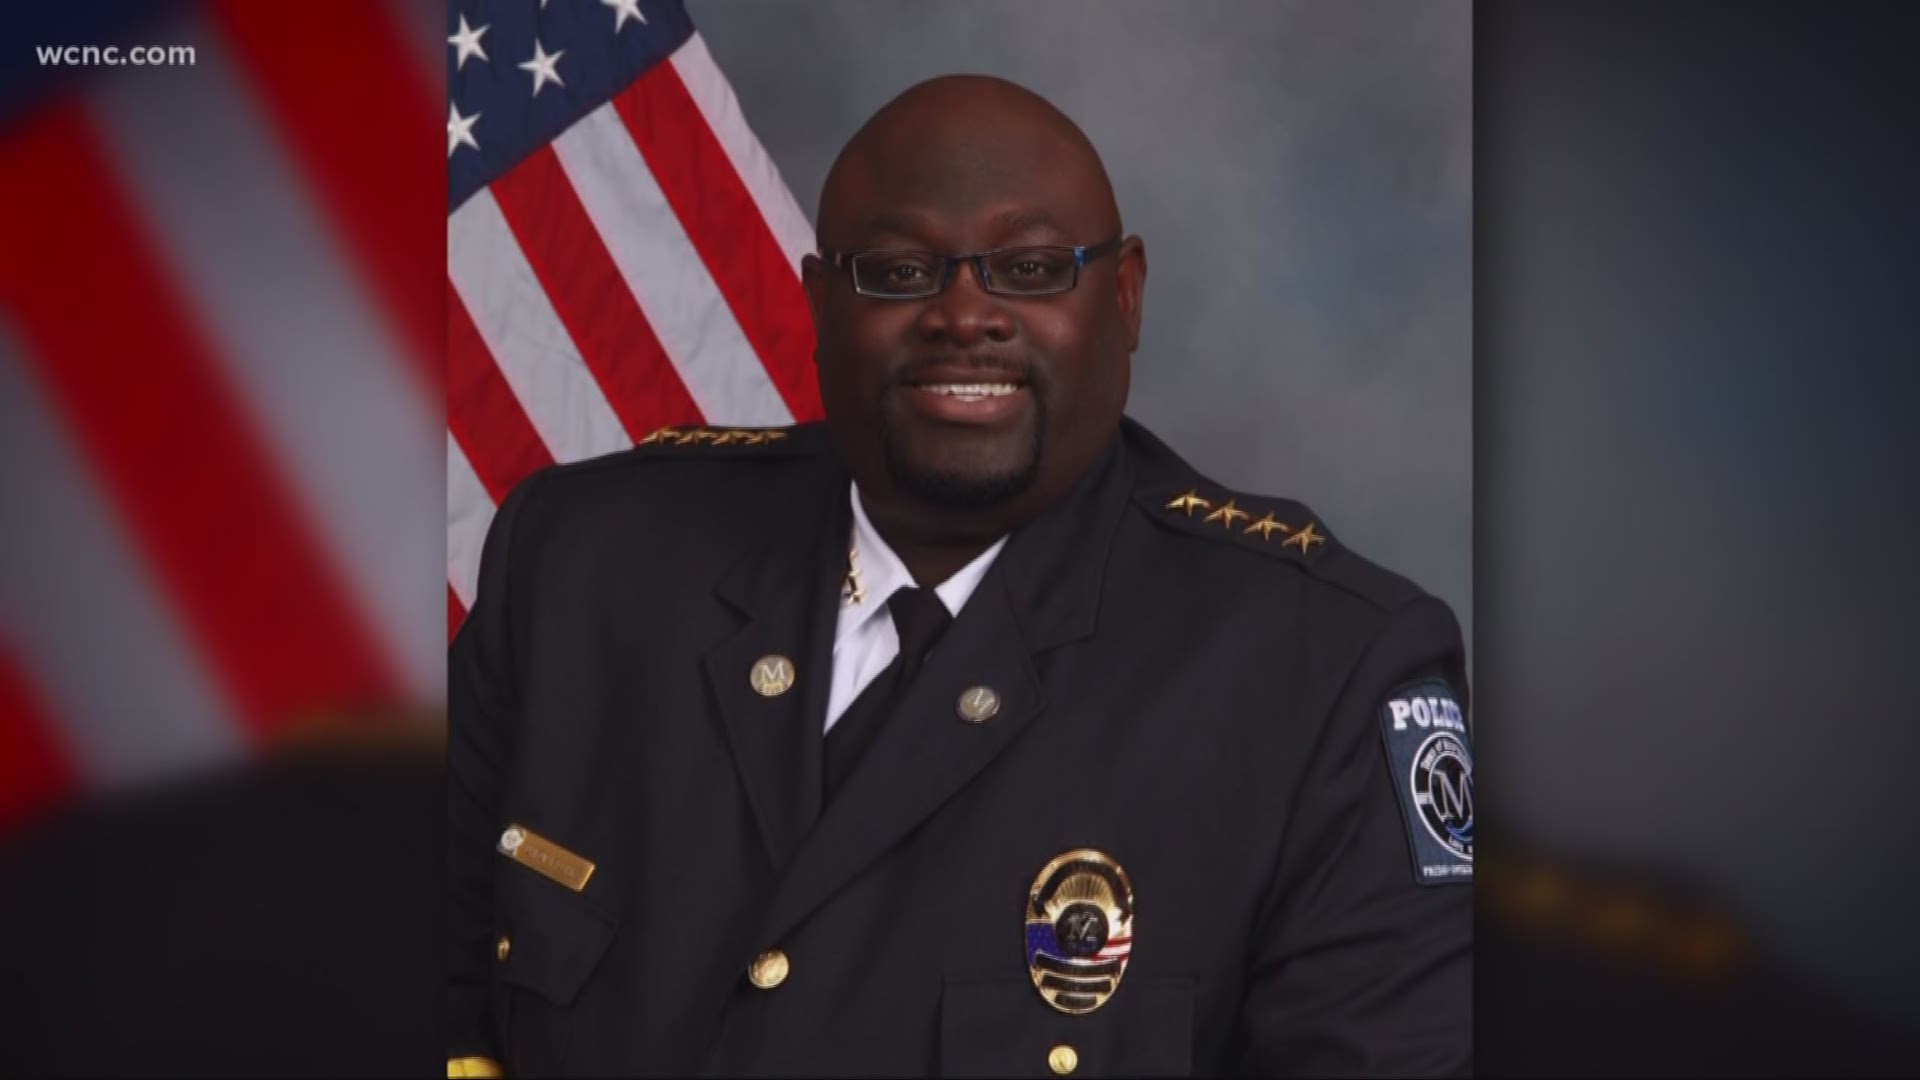 Chief Damon Williams was put on leave back in June. The department has said he didn’t do anything criminal, and it was a personnel matter.